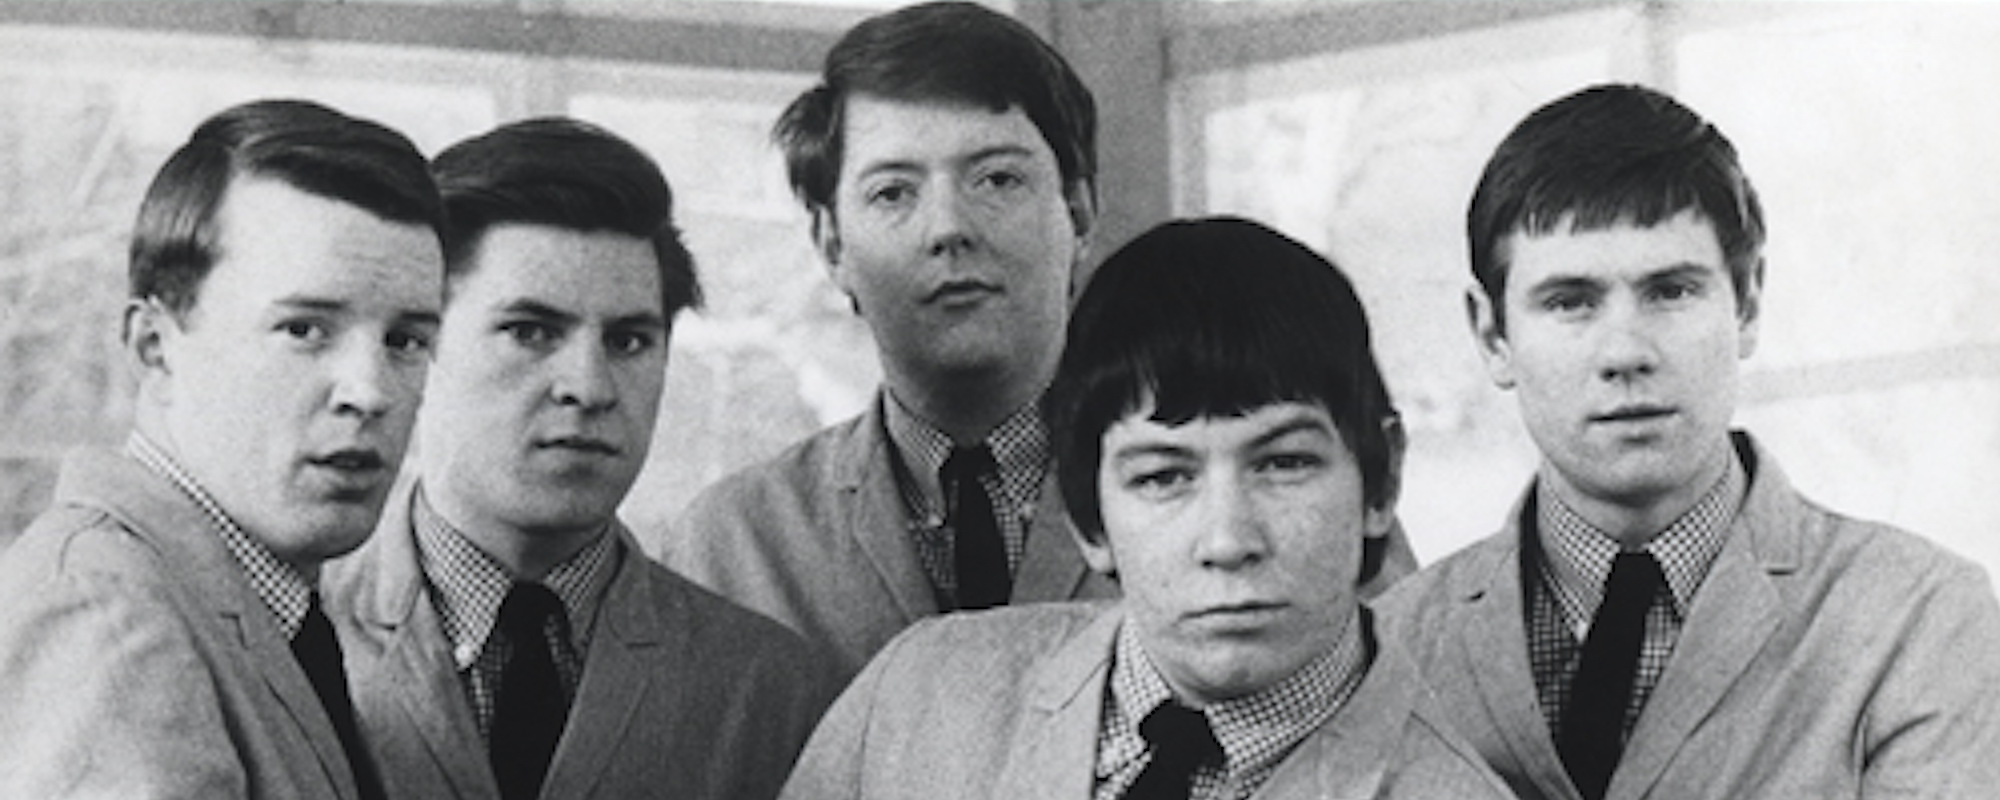 Behind The Song Lyrics: “House of the Rising Sun,” The Animals - American  Songwriter